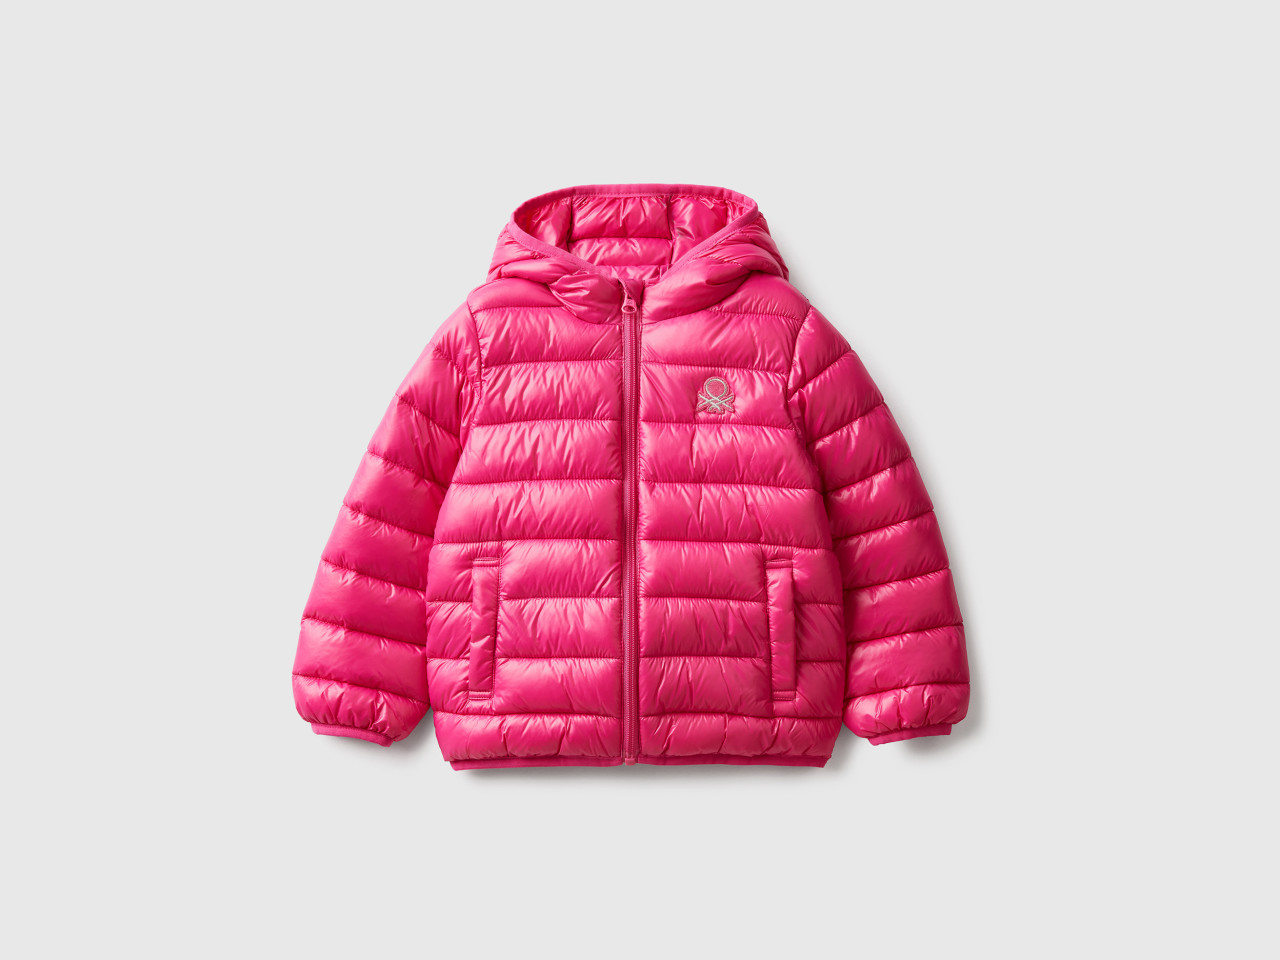 Chief Keef Bubble Jacket